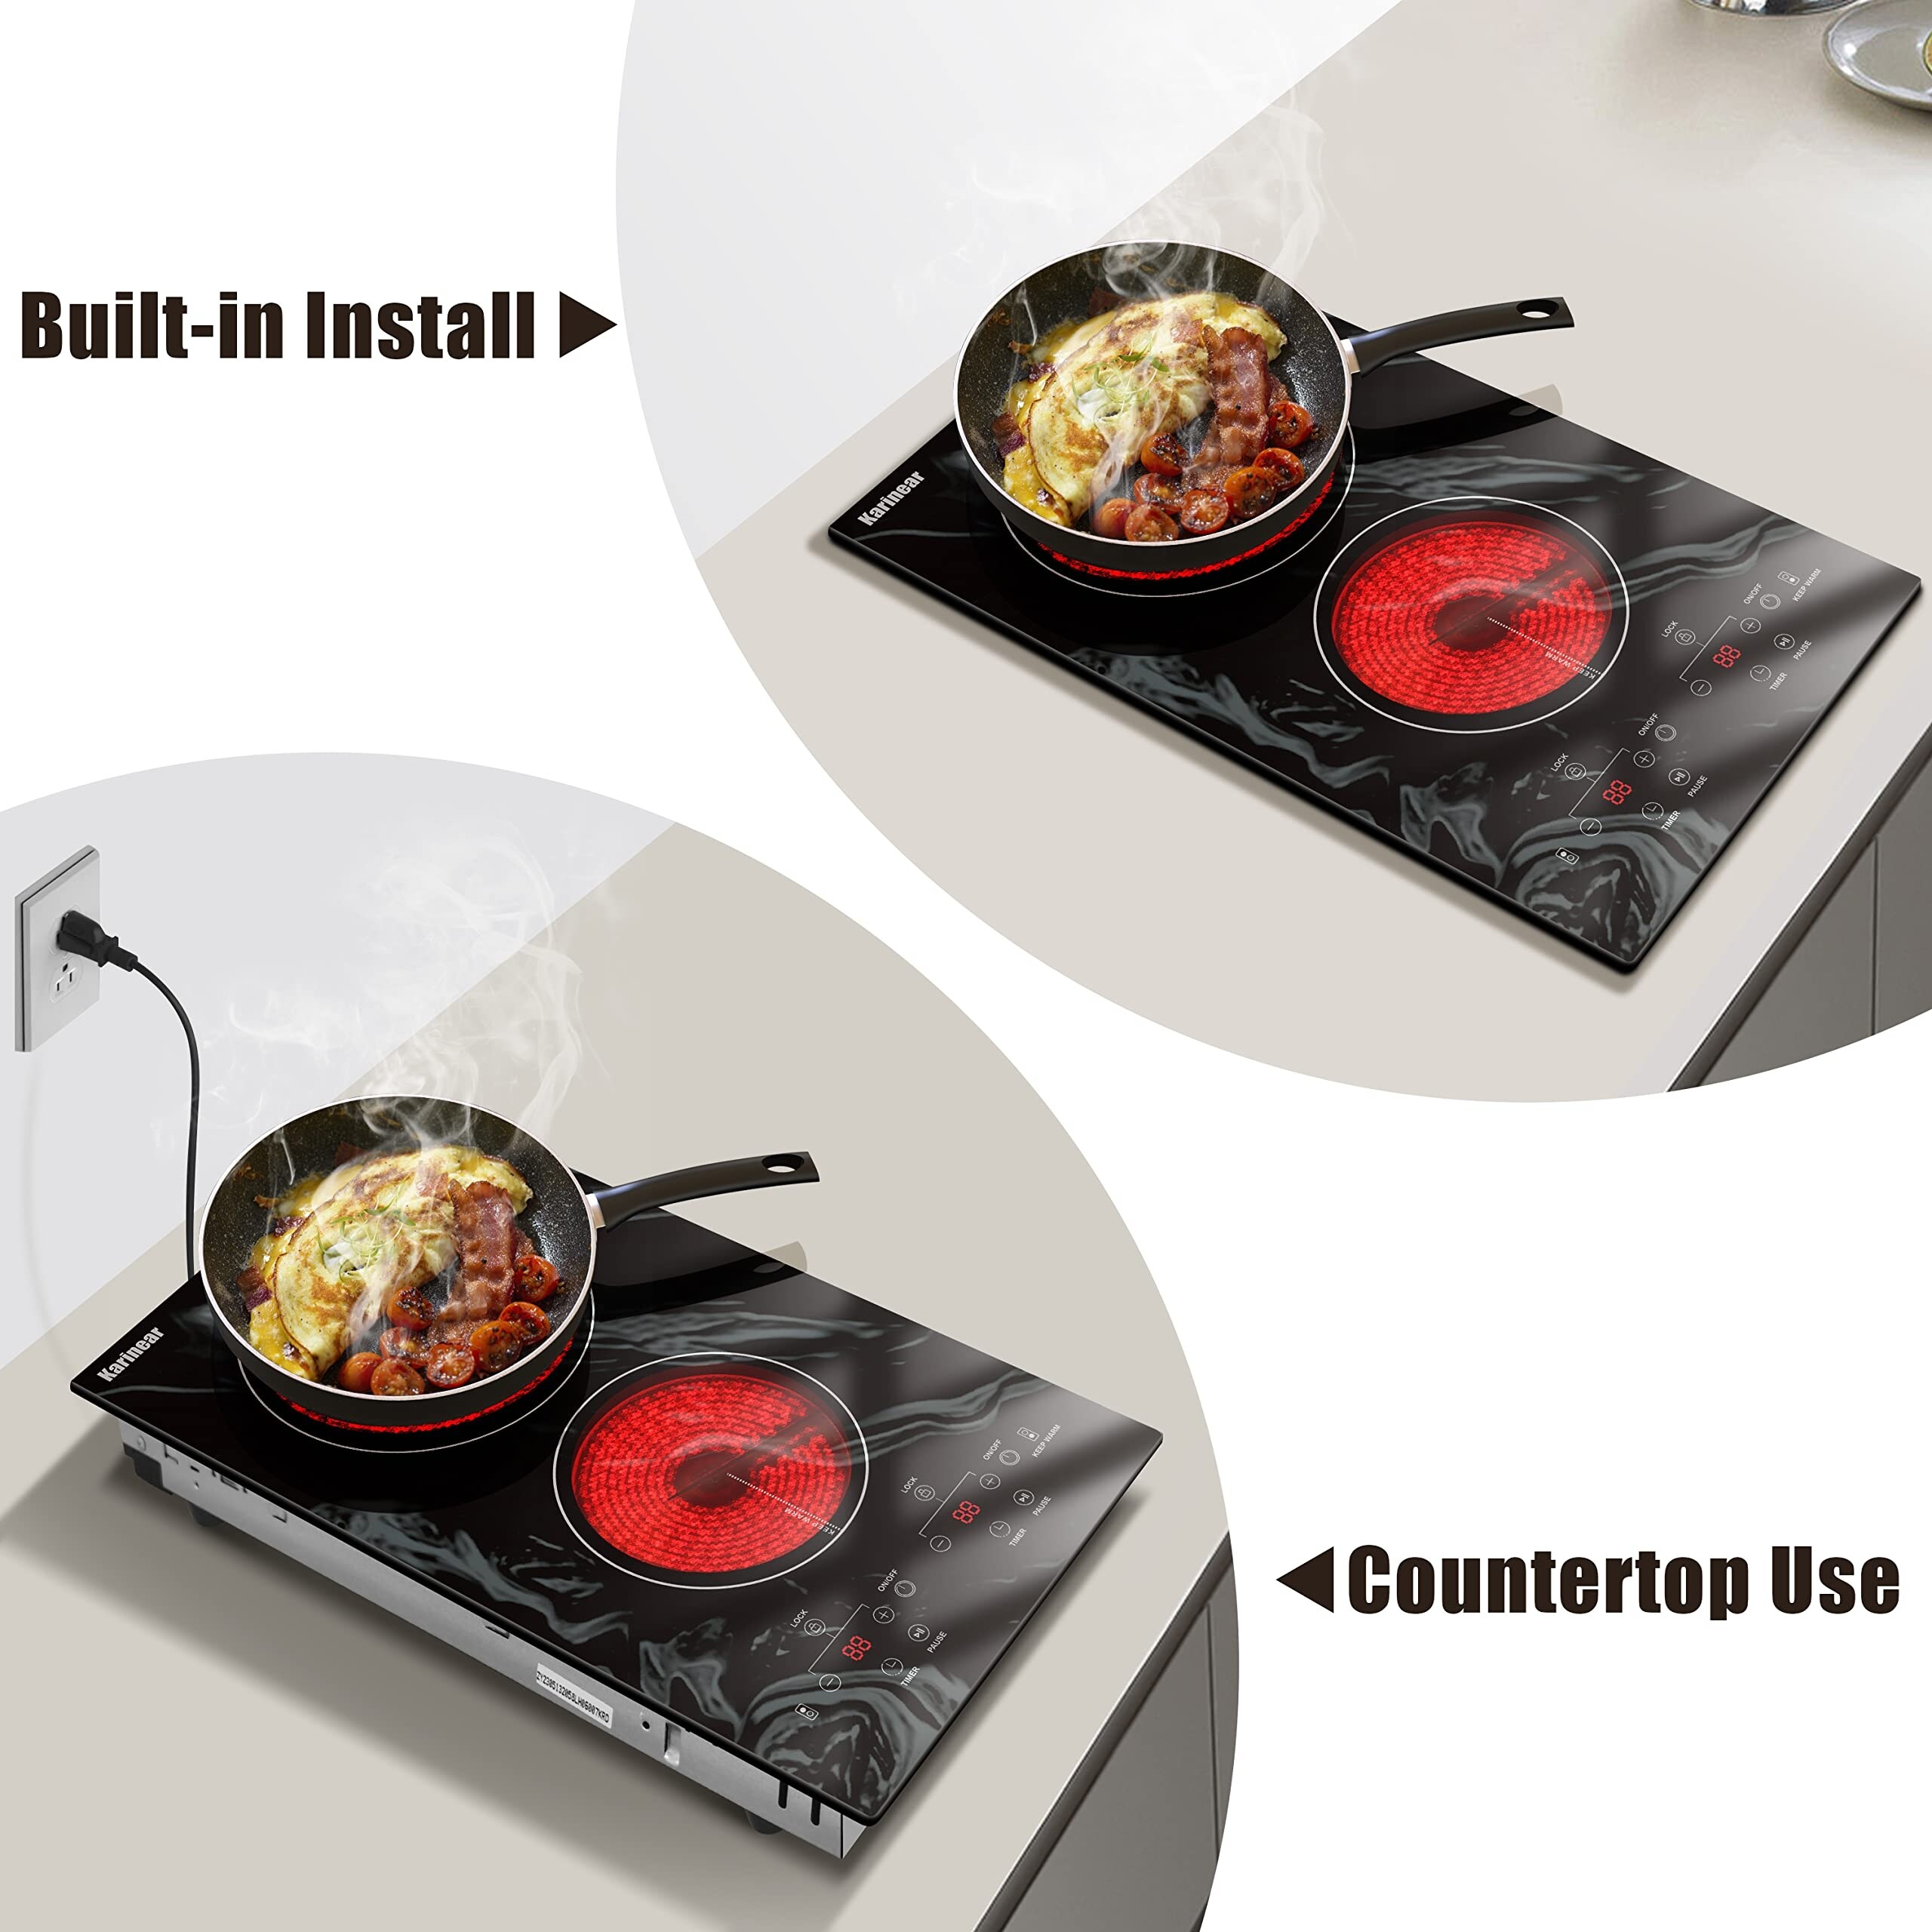 https://ak1.ostkcdn.com/images/products/is/images/direct/6aa7e93767634cacb17c72f4cc9ef479c369efc9/Portable-Electric-Cooktop-2-Burners%2C-110v-Plug-in-Electric-Stove-Top%2C-Countertop-Use-or-Built-in-Install%2C-12%27%27-Ceramic-Cooktop.jpg